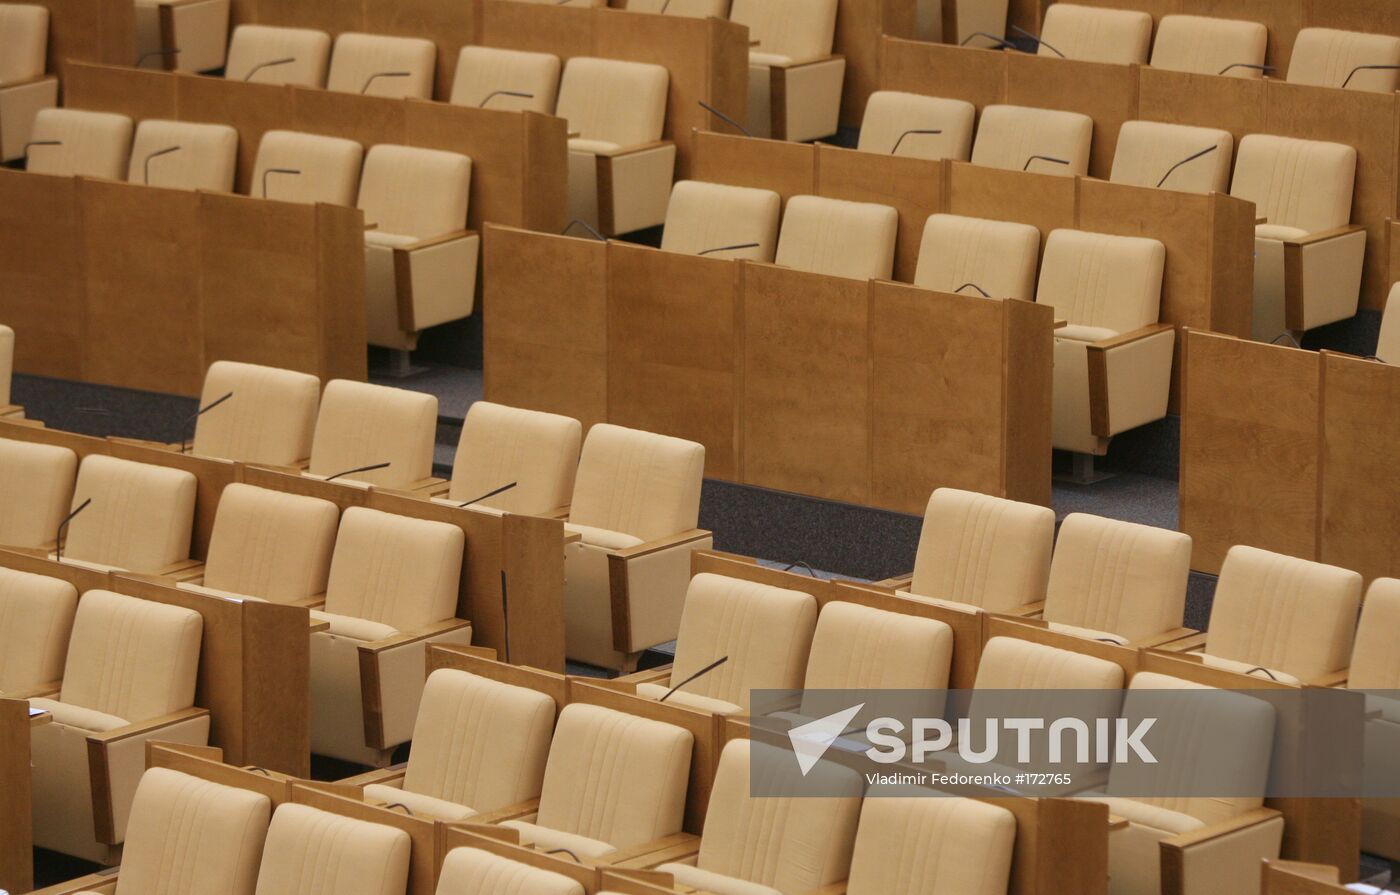 The last meeting of the 4th State Duma 